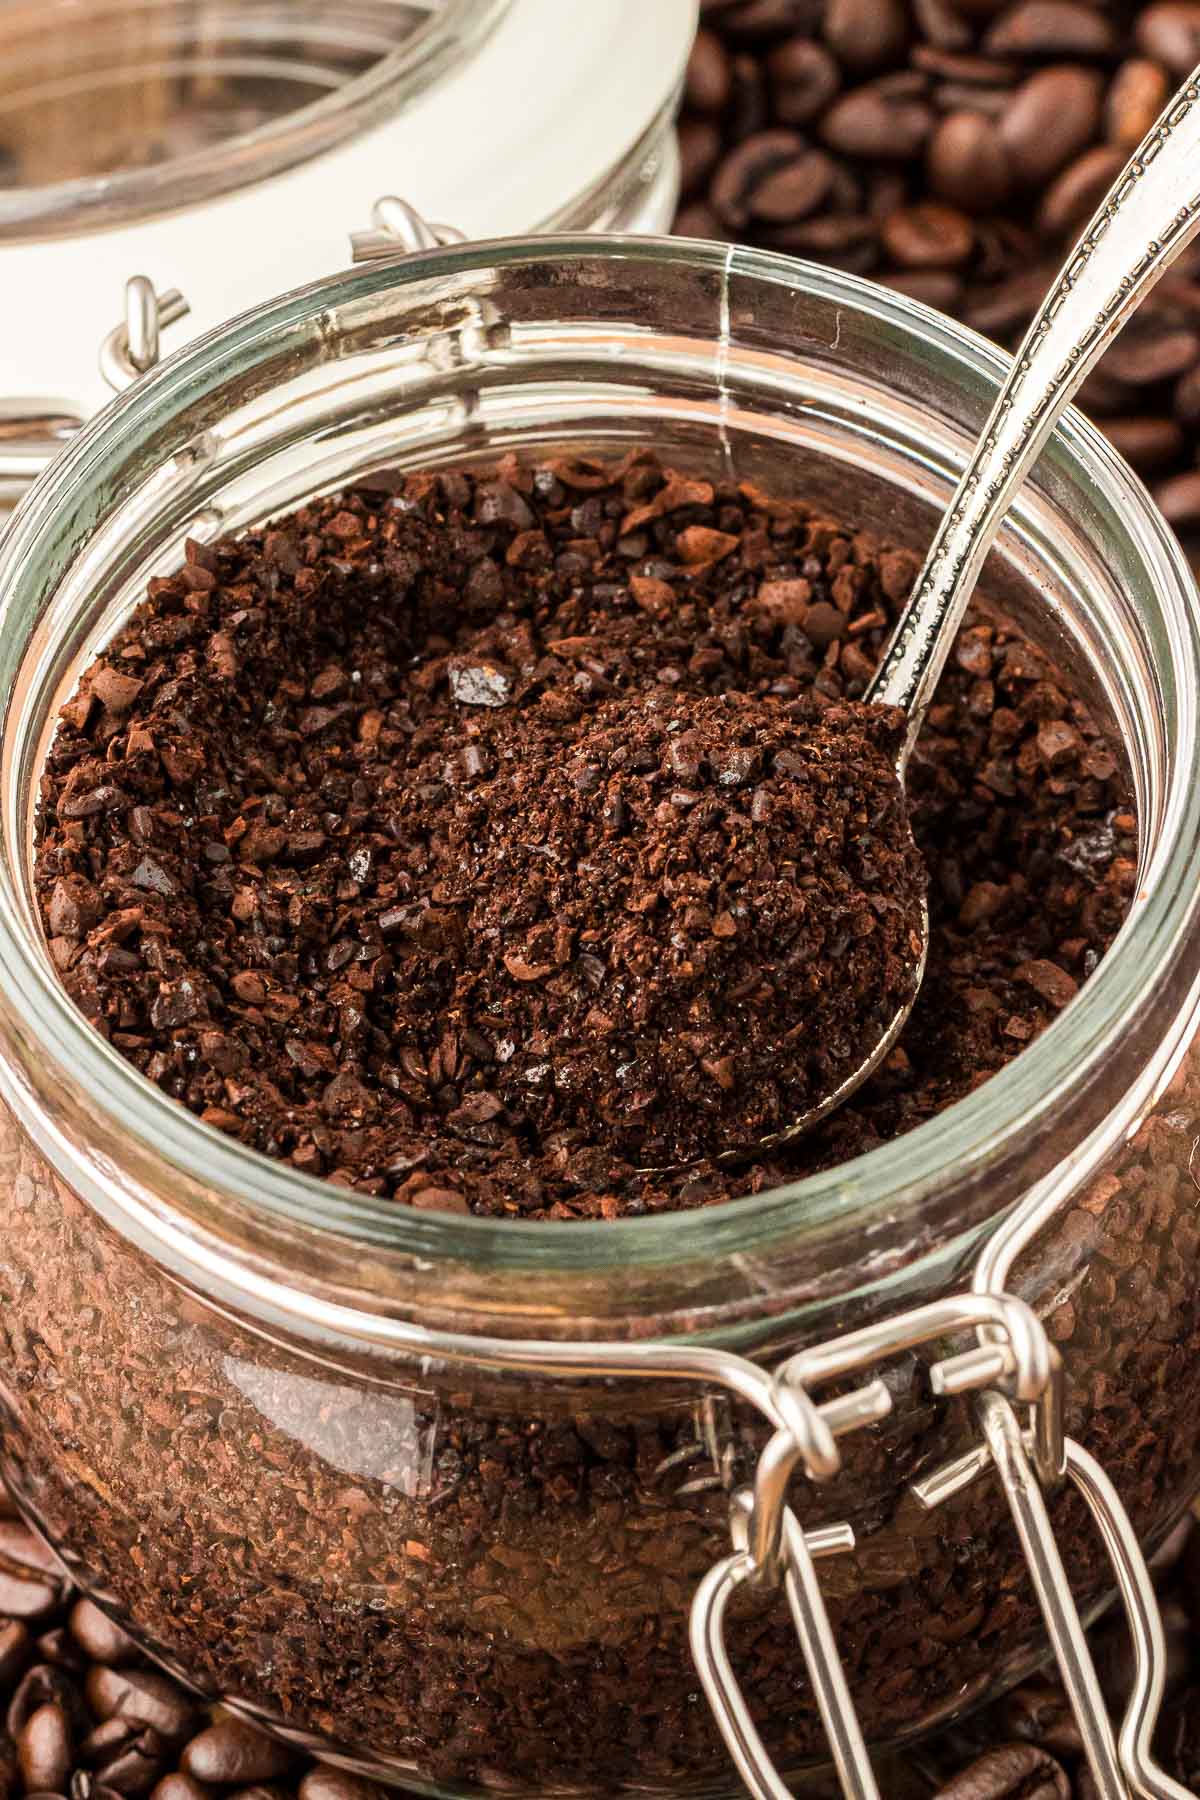 Coffee grounds in a glass jar.